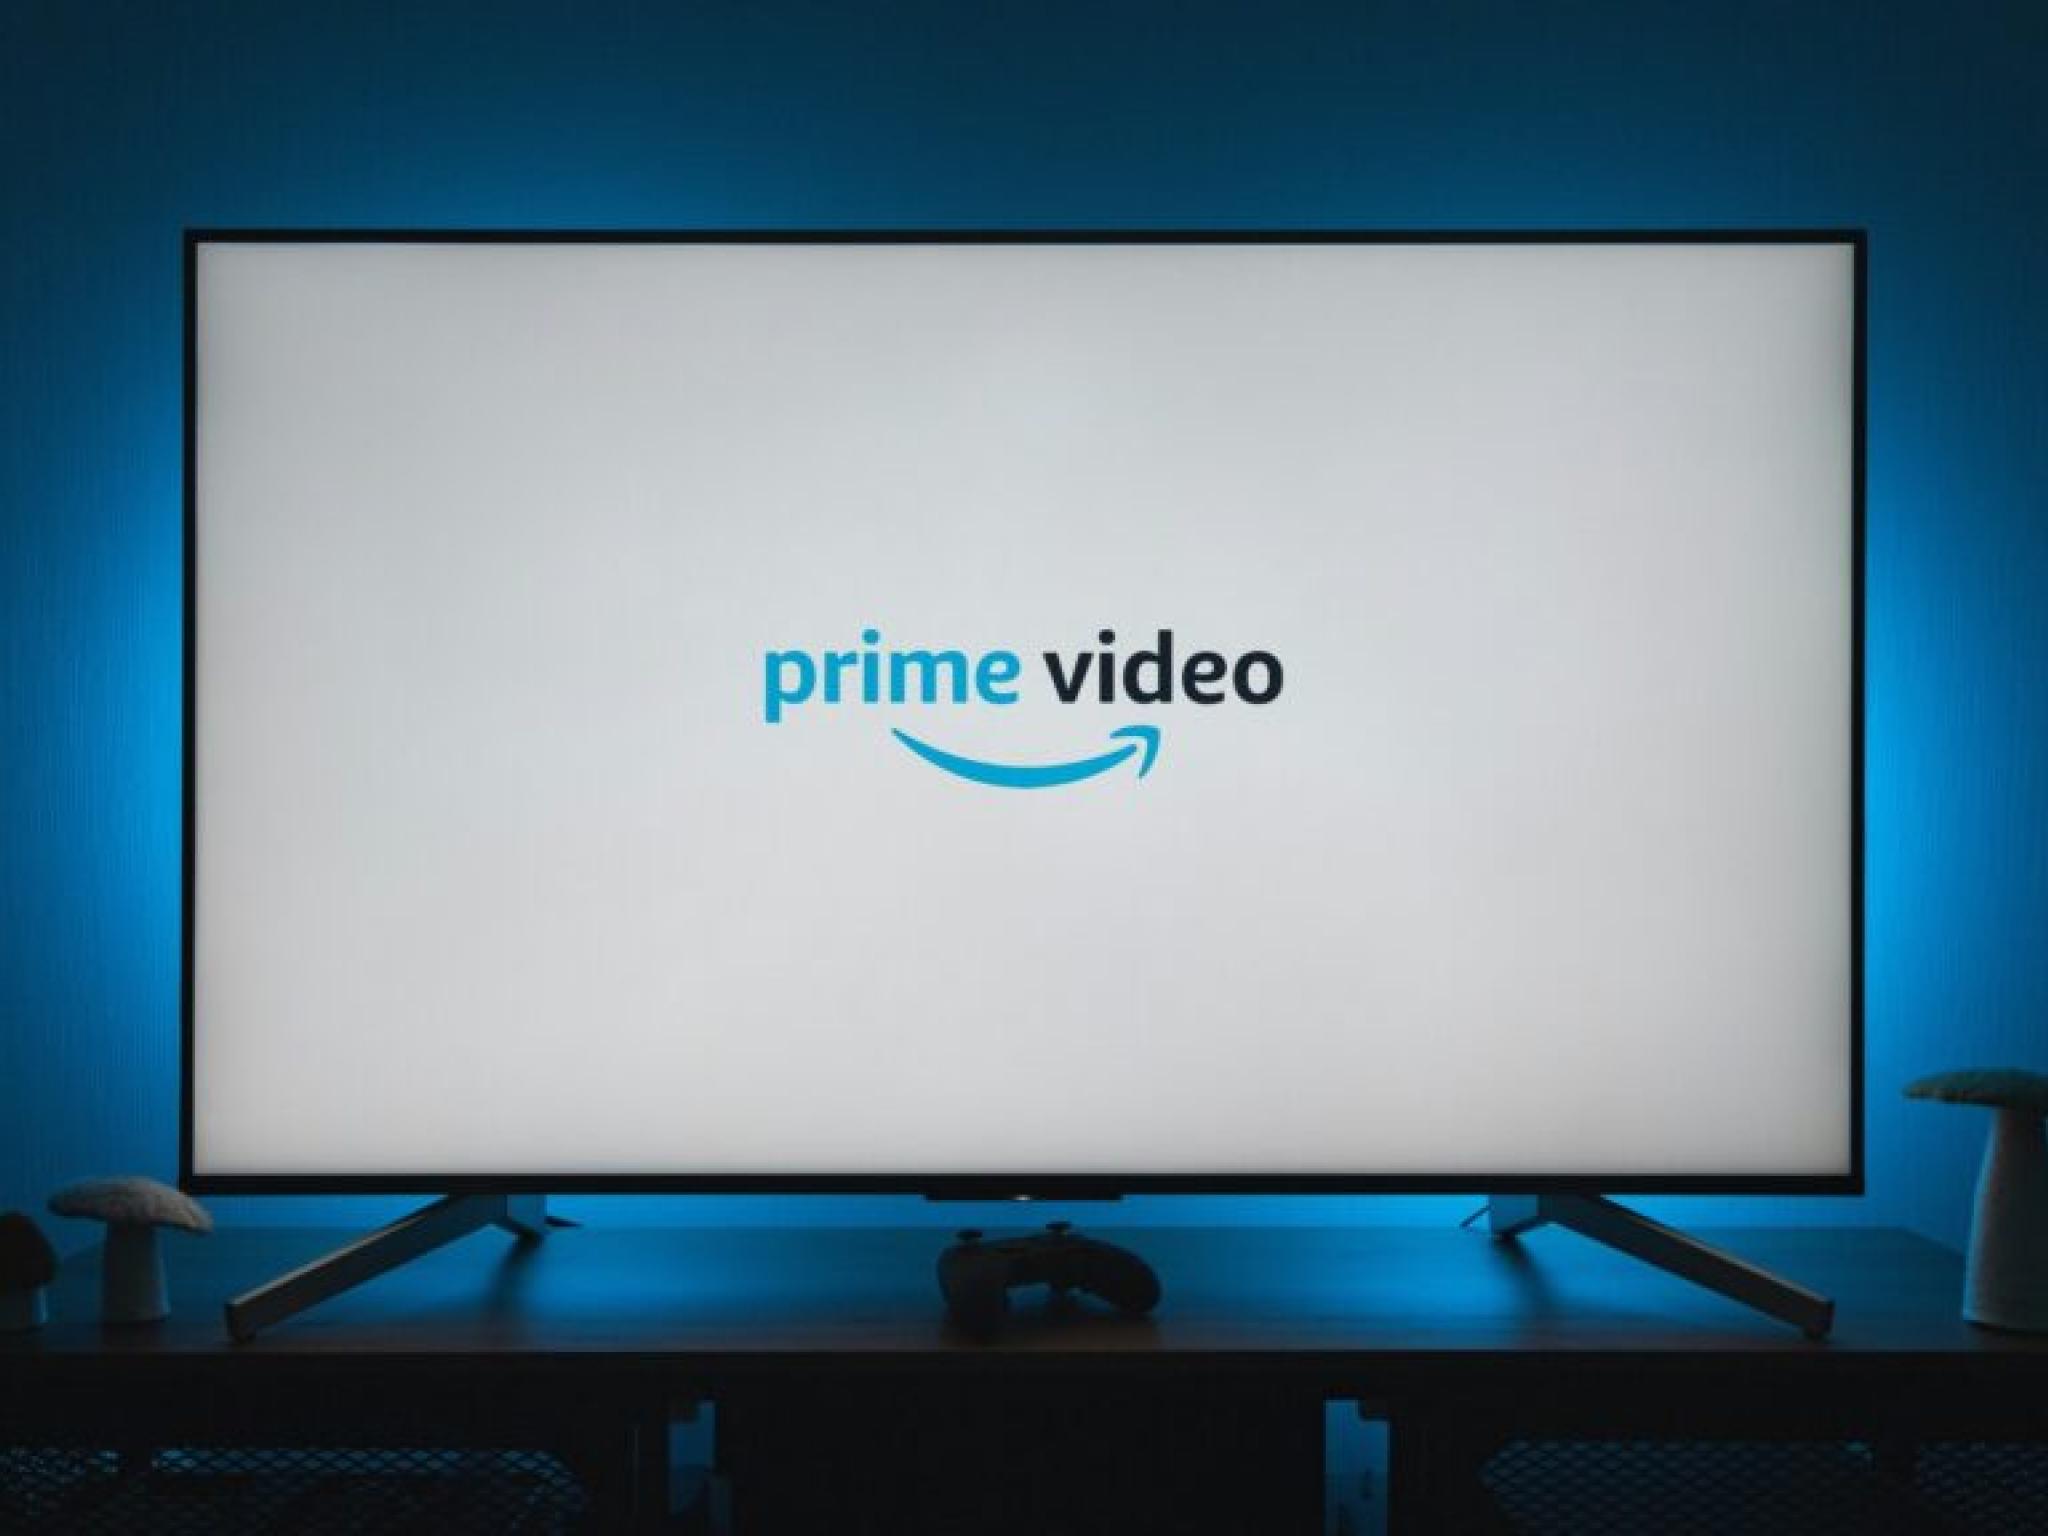  amazon-ceo-says-while-ads-have-become-a-norm-prime-video-intends-to-have-meaningfully-fewer-ads-than-netflix-youtube-disney-and-others 